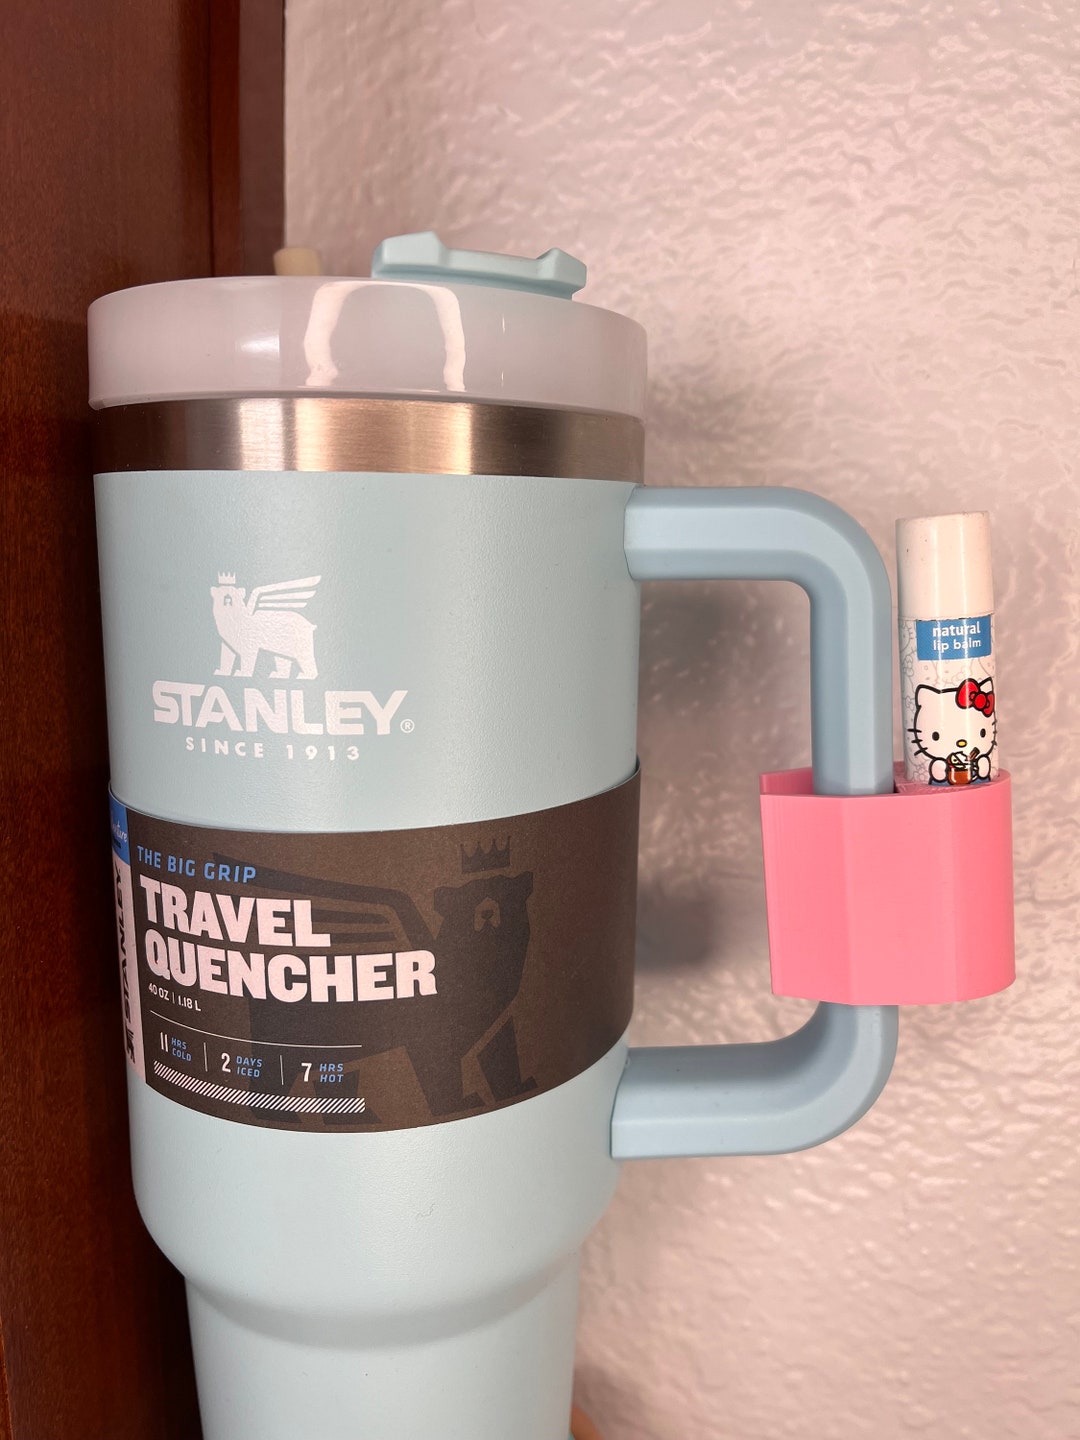 Never lose your chapstick again! #stanleytumbler #stanley #stanleycup